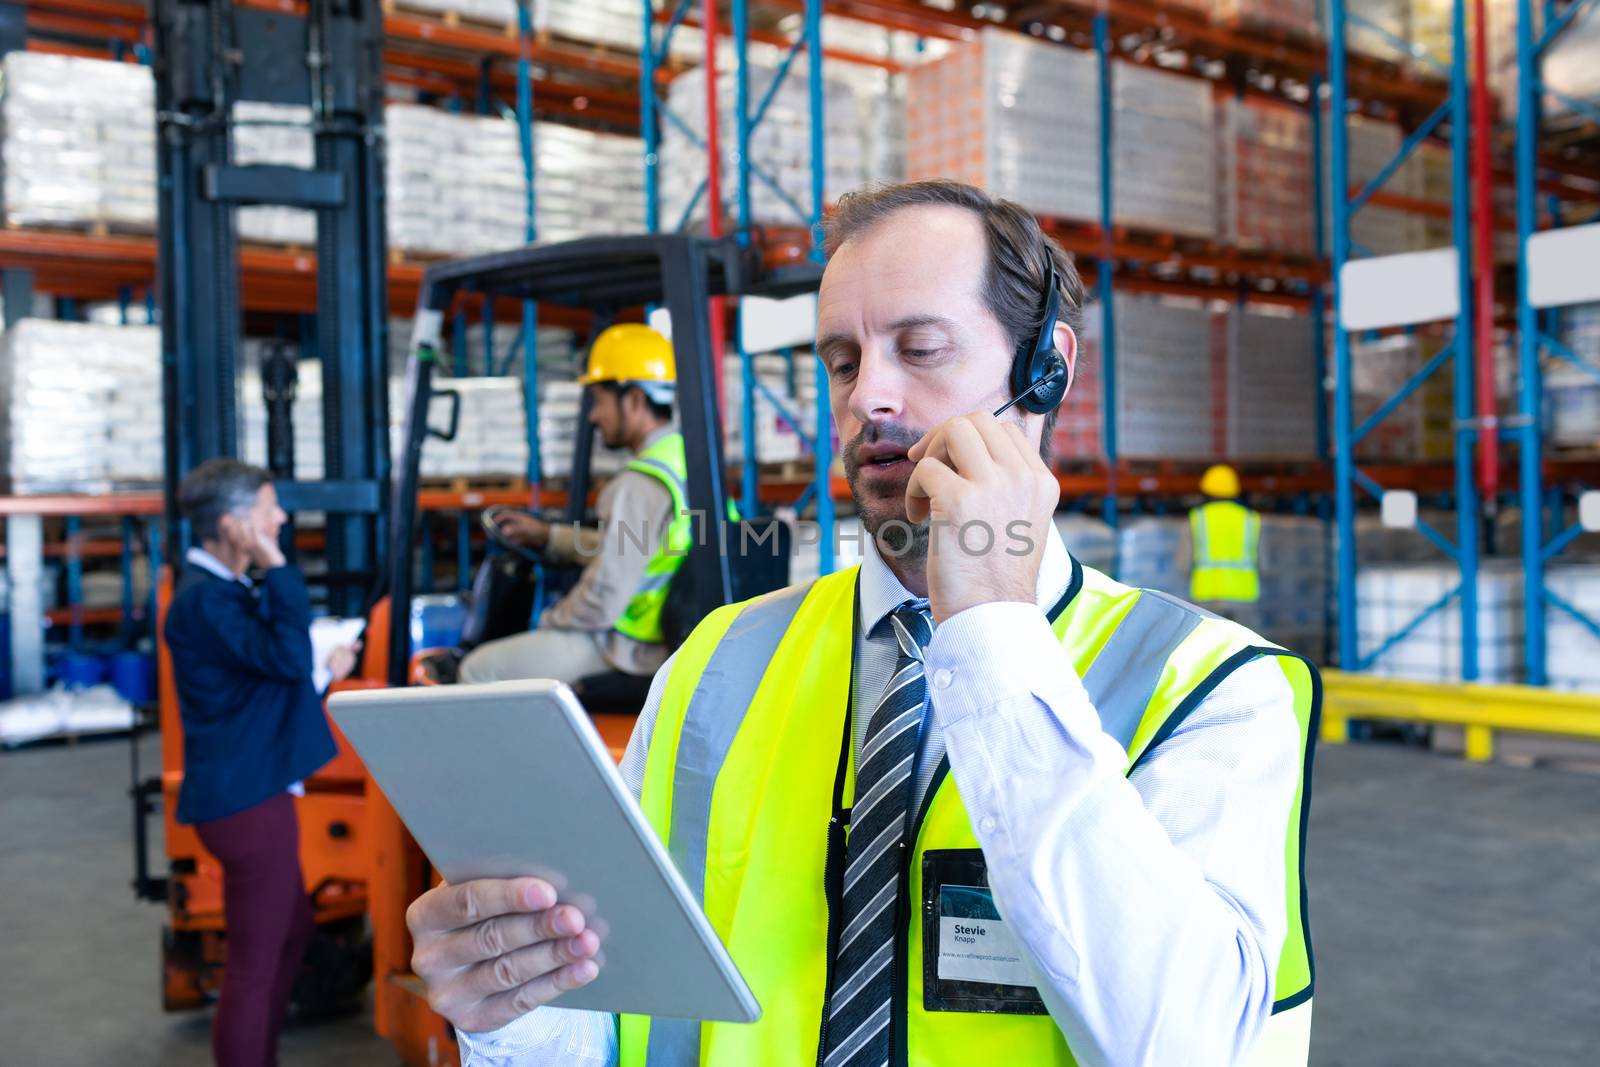 Close-up of handsome Caucasian male supervisor using digital tablet while talking on headset in warehouse. Diverse colleagues communicating in the background. This is a freight transportation and distribution warehouse. Industrial and industrial workers concept